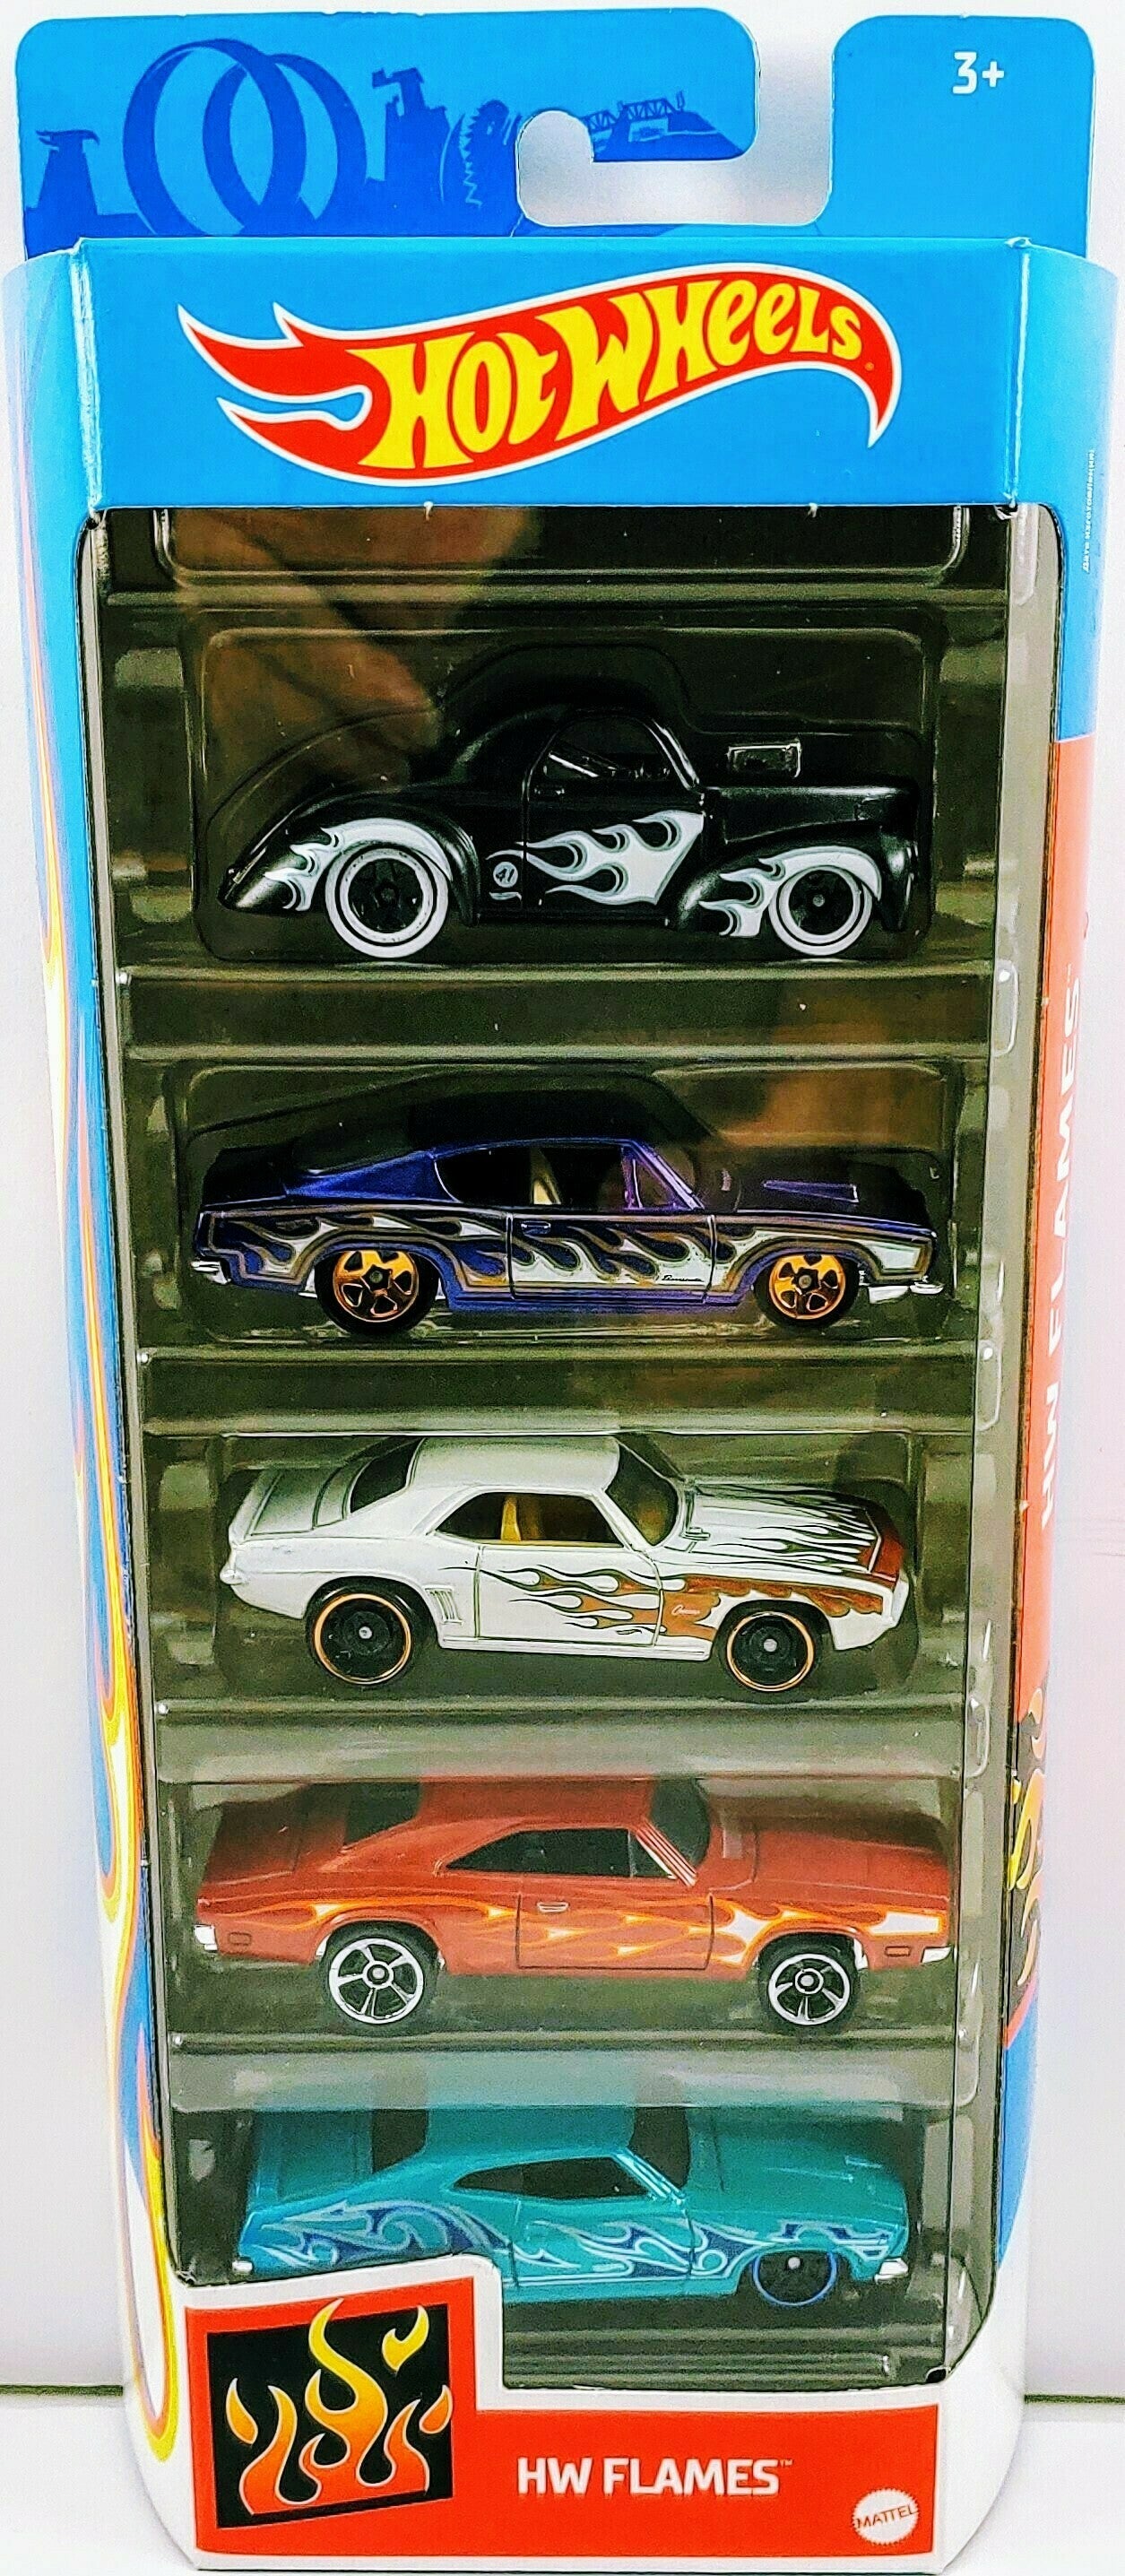 Hot Wheels 2021 - Gift Pack / 5 Pack - HW Flames - '41 Willys, '68 HEMI Barracuda, '69 Camaro, '69 Dodge Charger 500 and '73 Ford Falcon XB